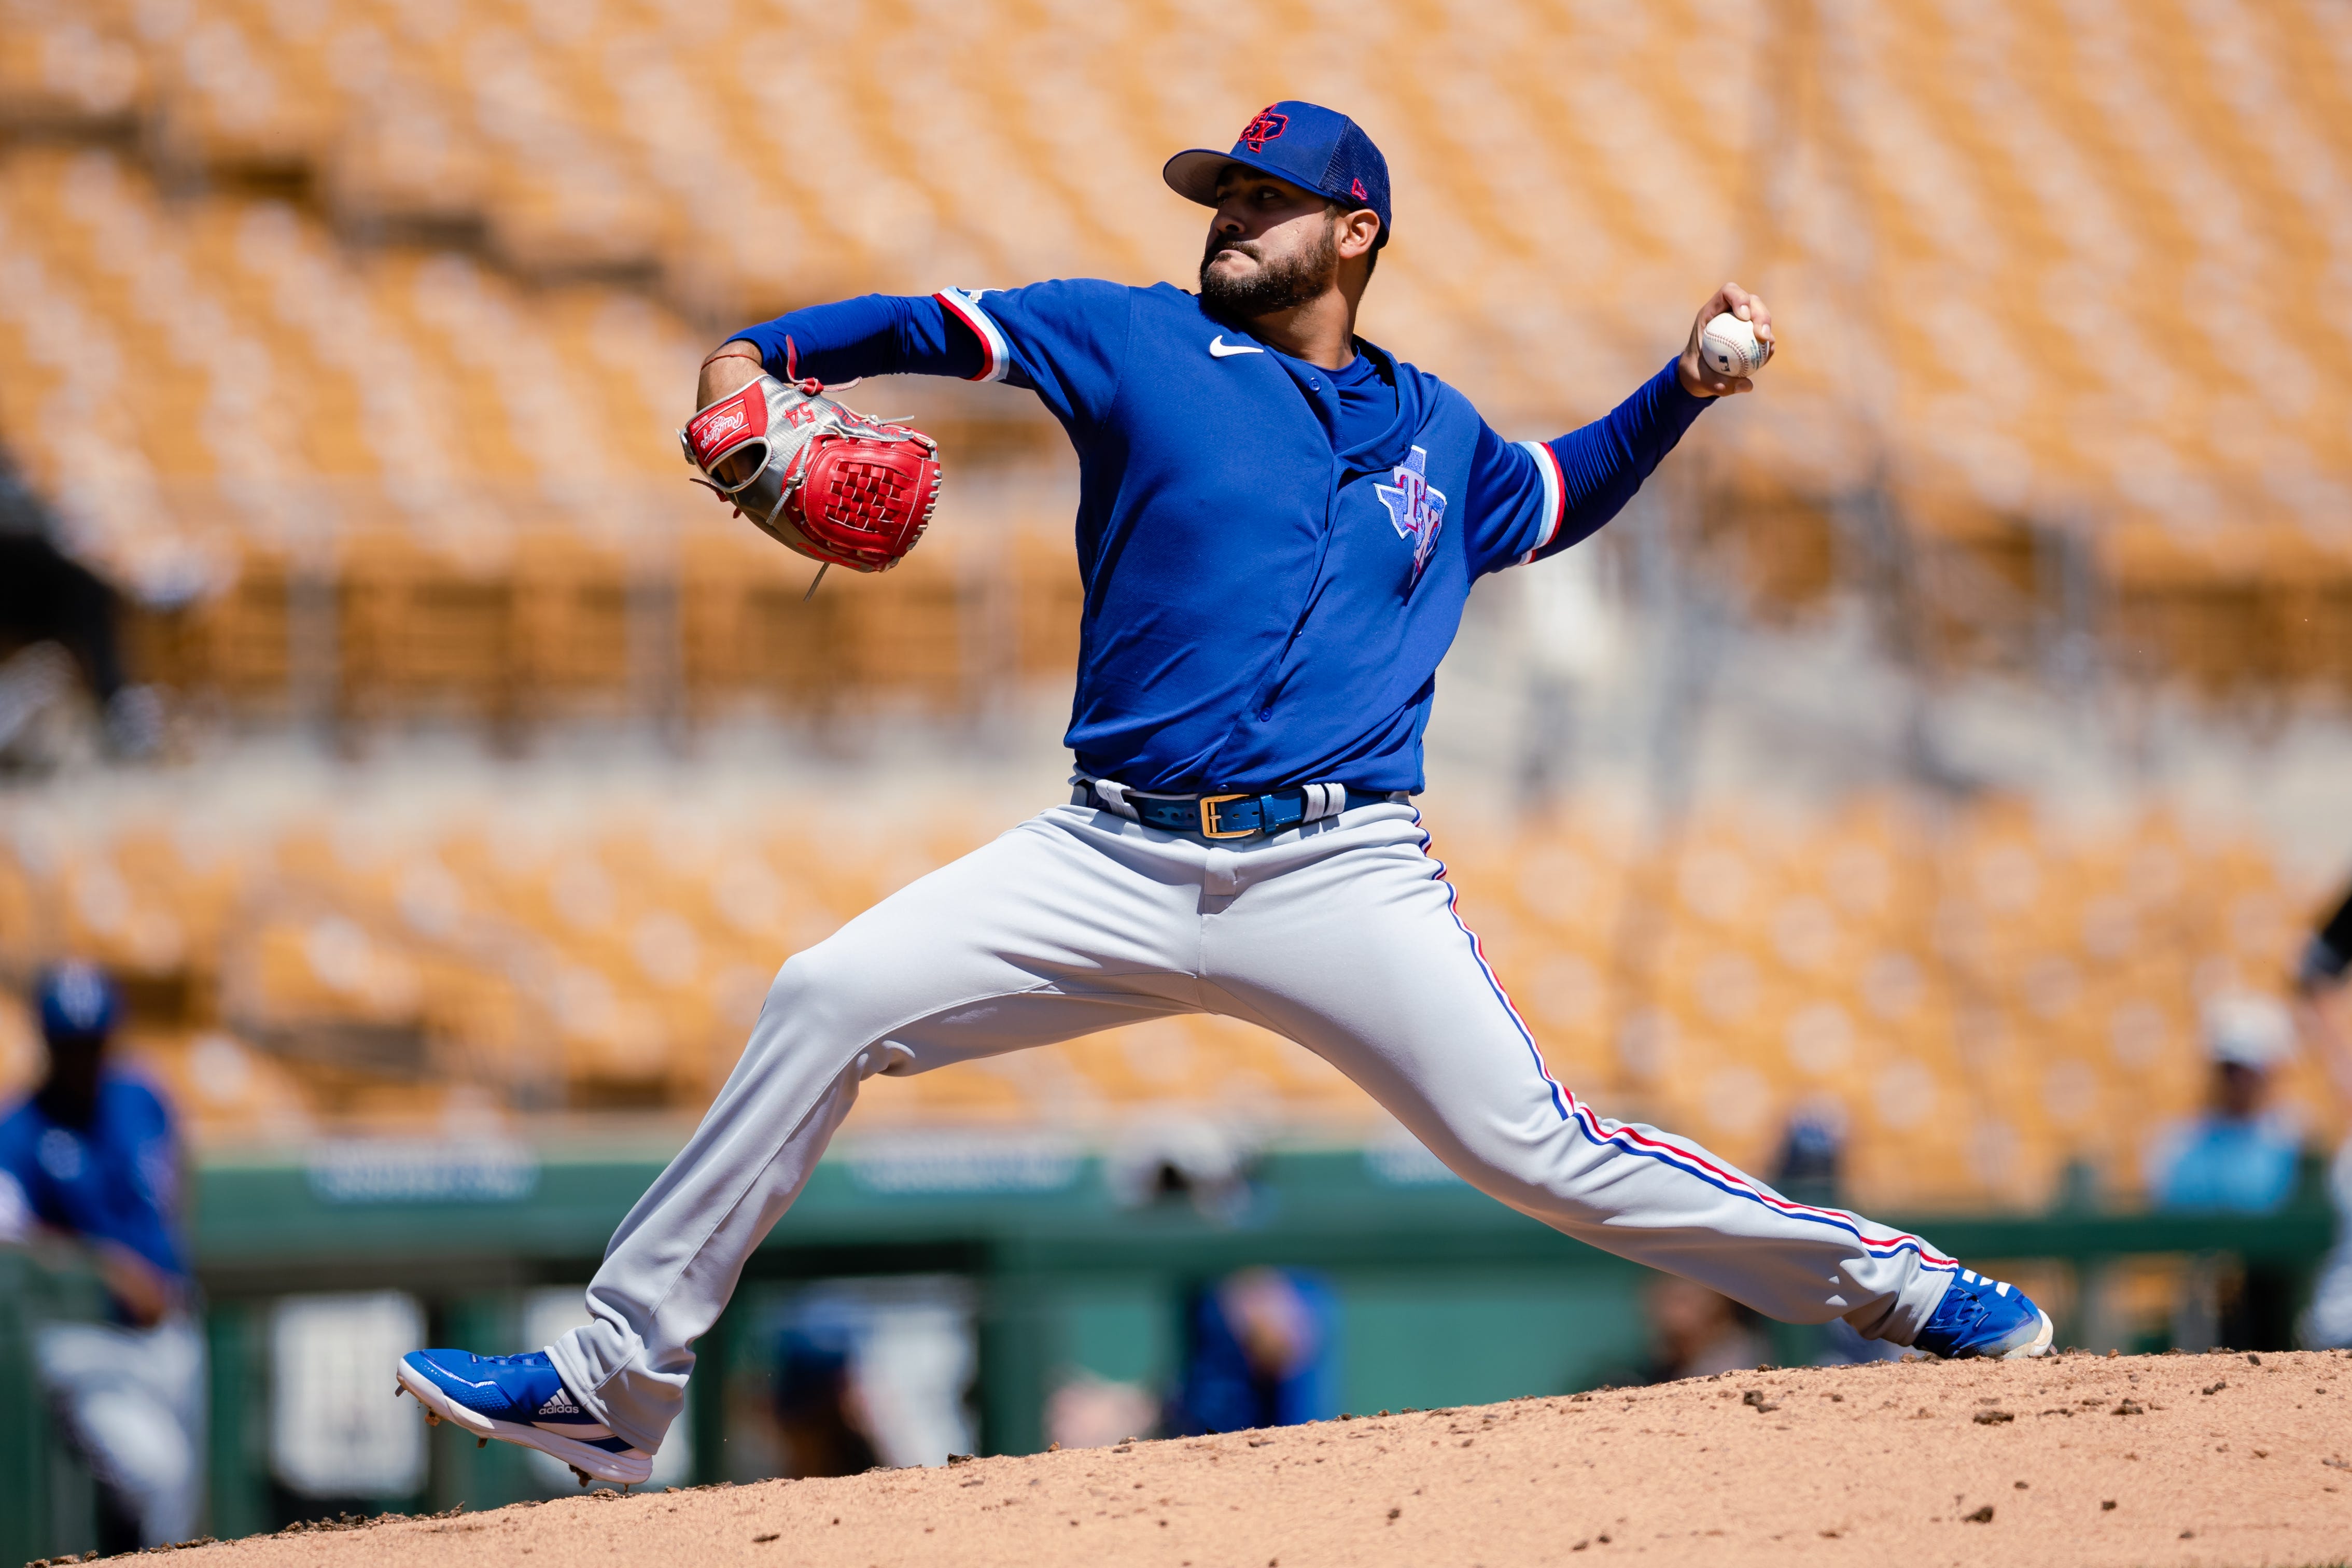 Thursday Newsletter time: Quiet spring for Martin Perez, but he